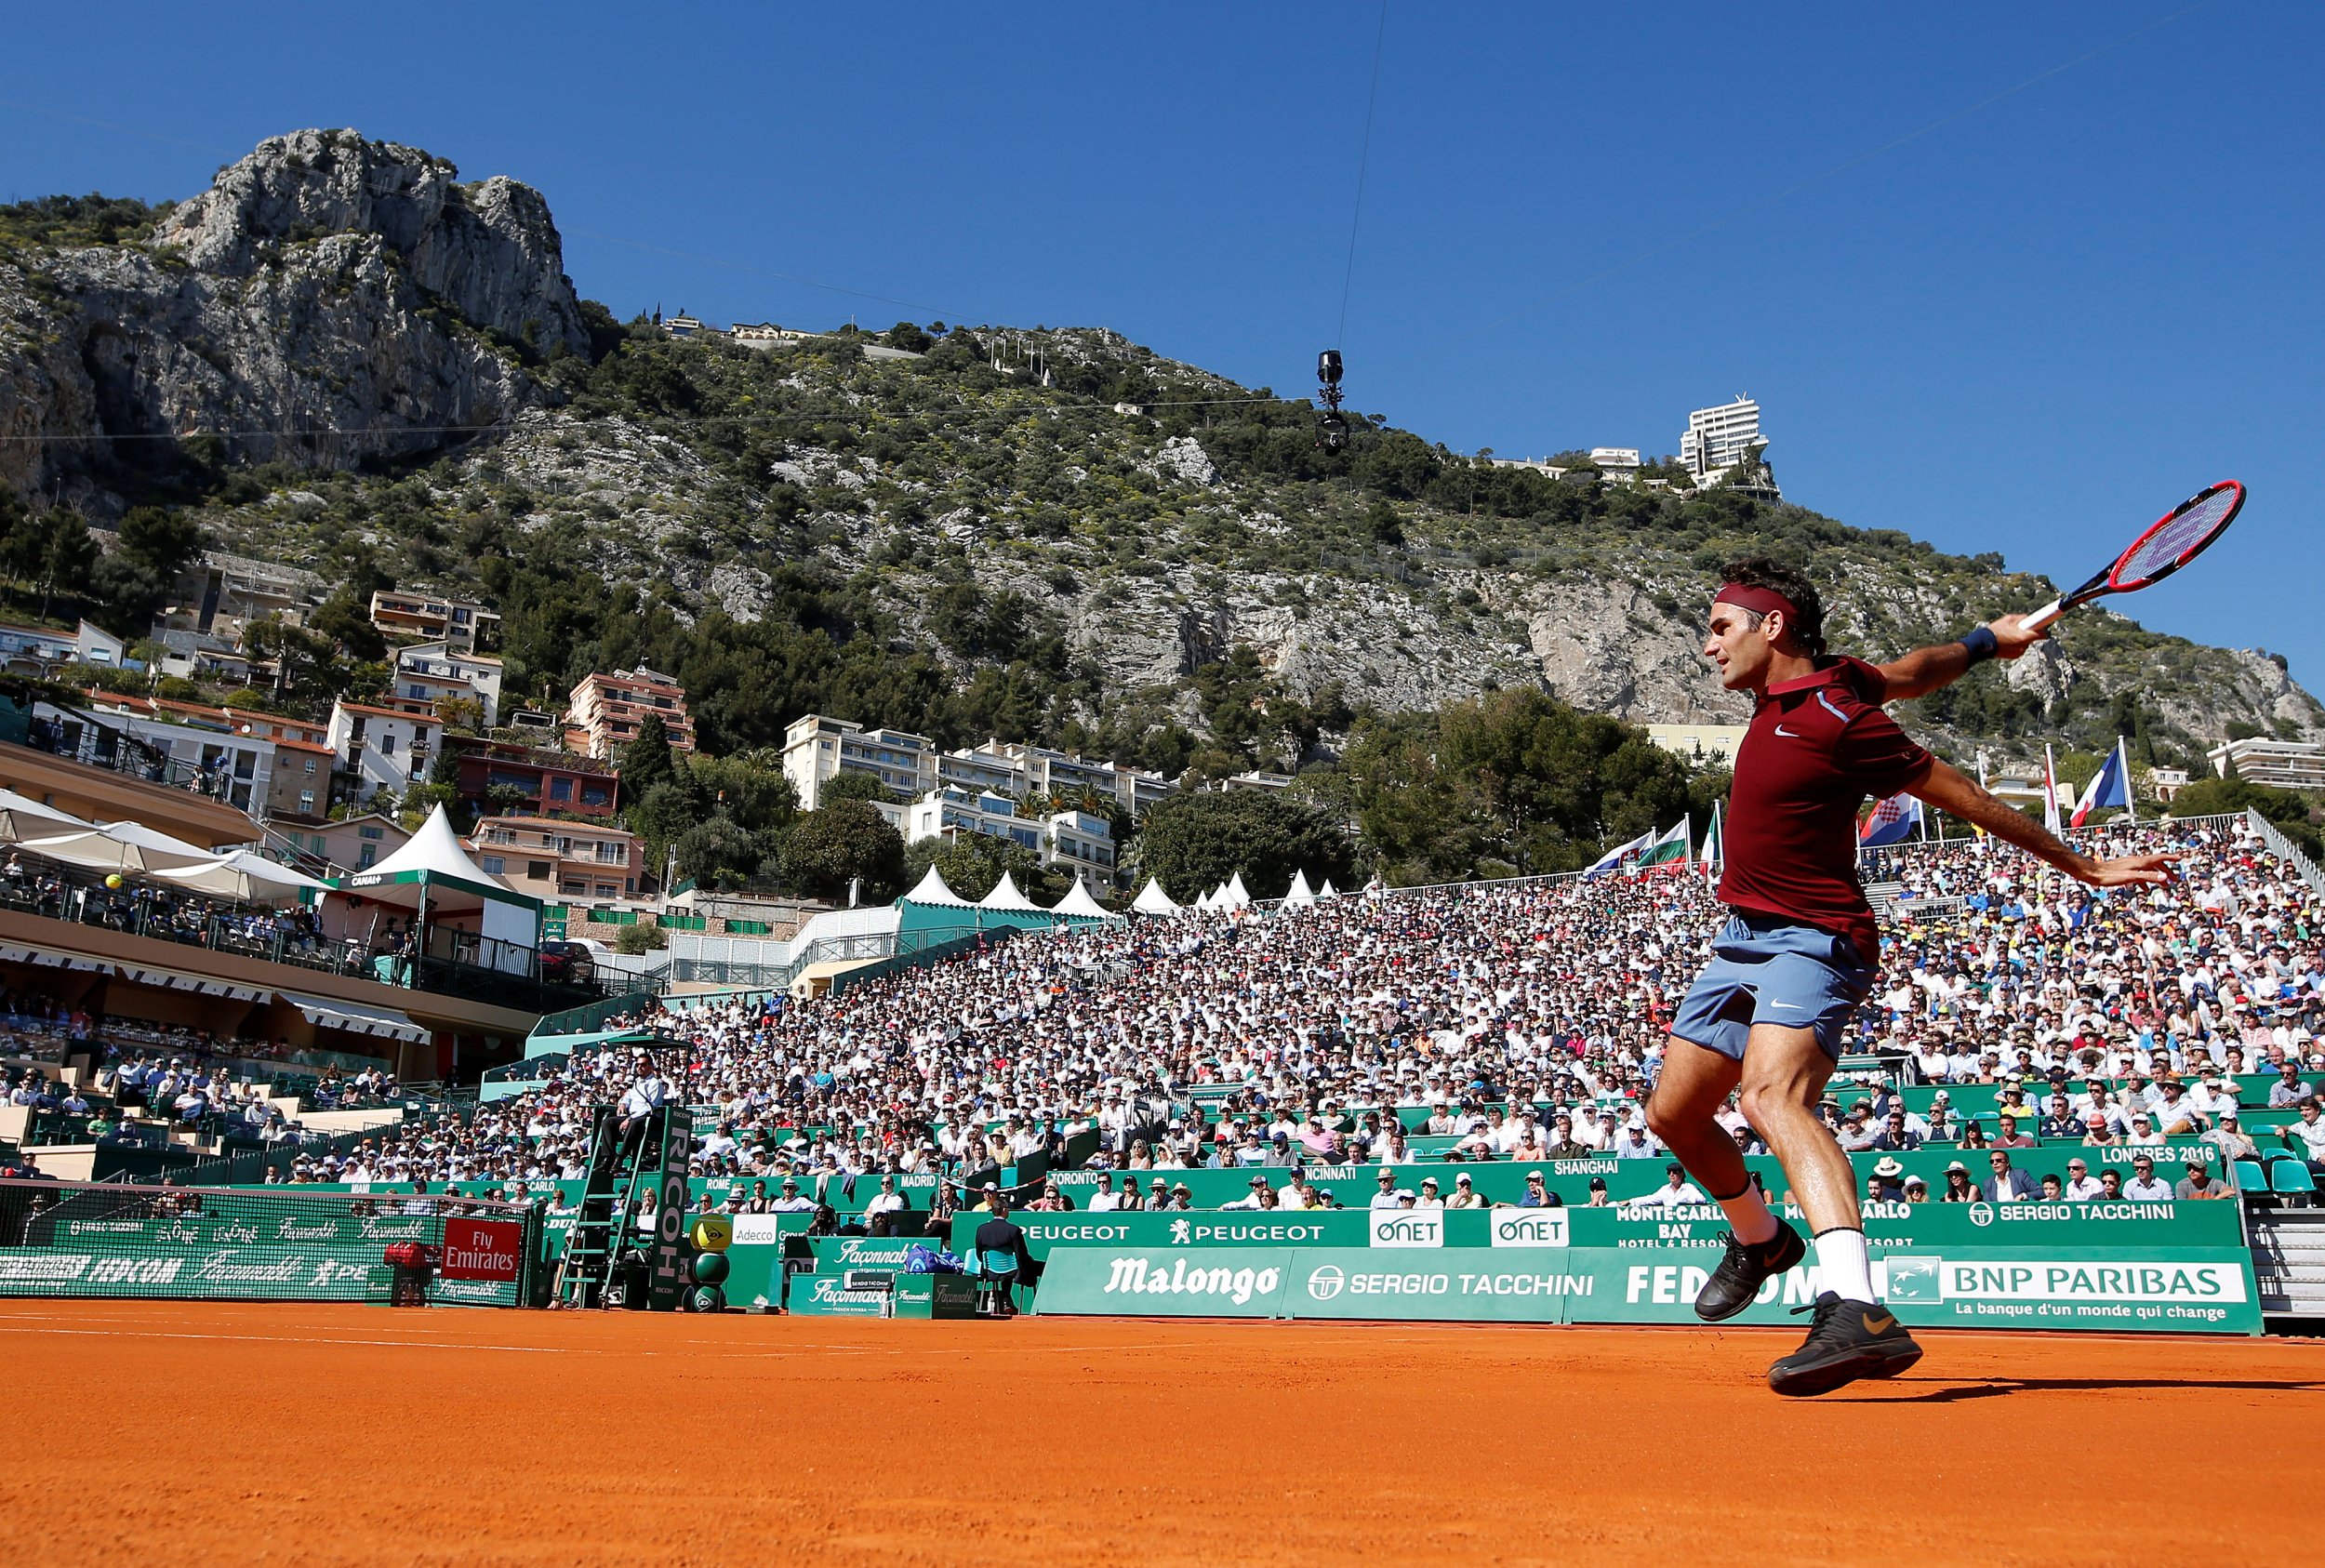 Watch Monte Carlo Masters 2016 Roger Federer vs Roberto Bautista Agut Round of 16 preview, live streaming info and score updates